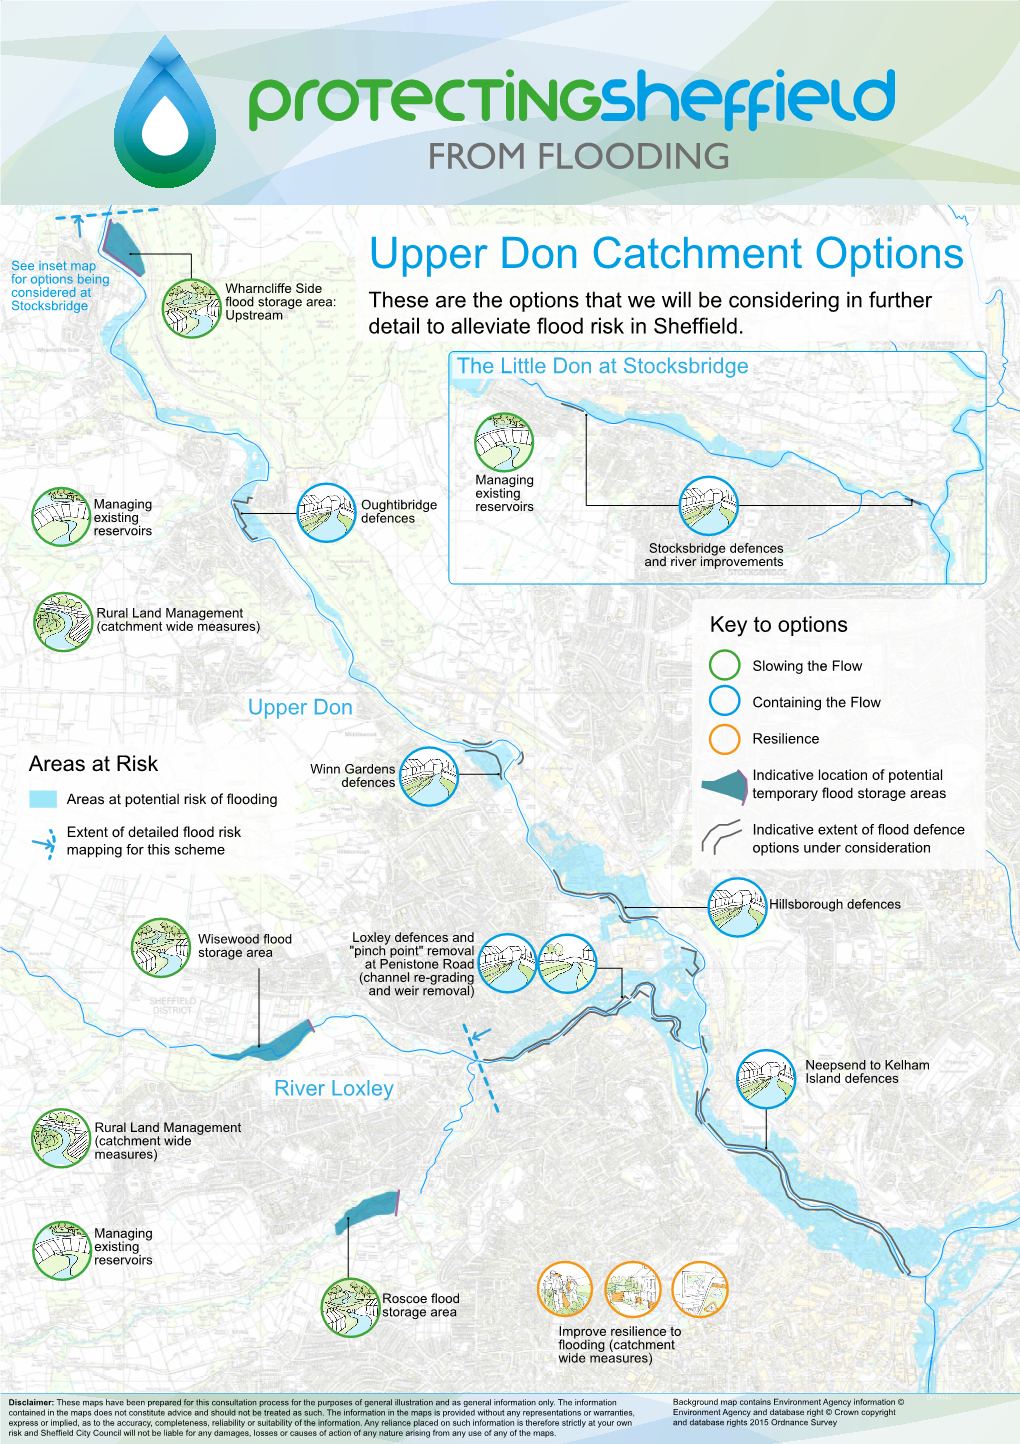 Upper Don River Loxley the Little Don at Stocksbridge Key to Options Areas at Risk These Are the Options That We Will Be Conside